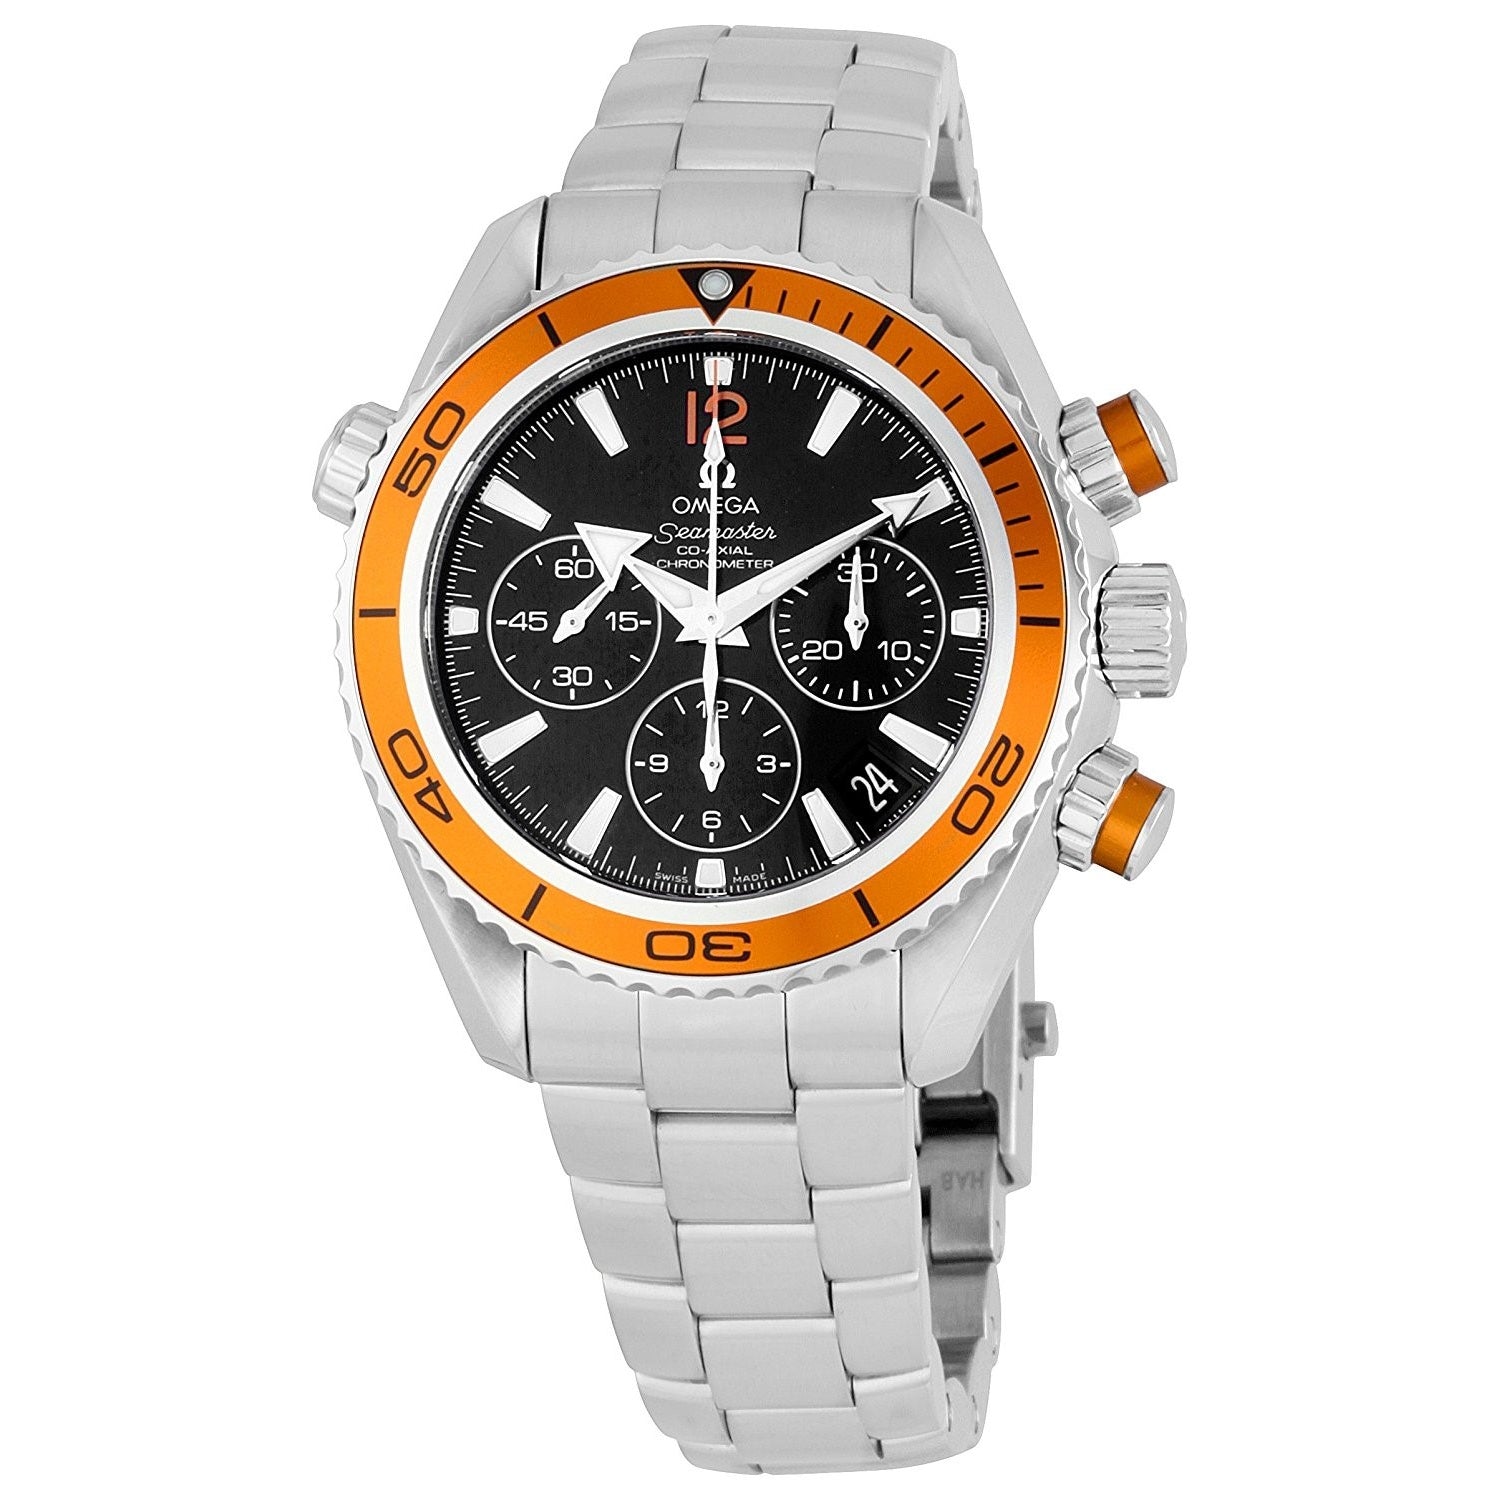 Omega Seamaster Planet Ocean Automatic Chronograph Automatic Black Dial Men's Watch 222.30.38.50.01.002